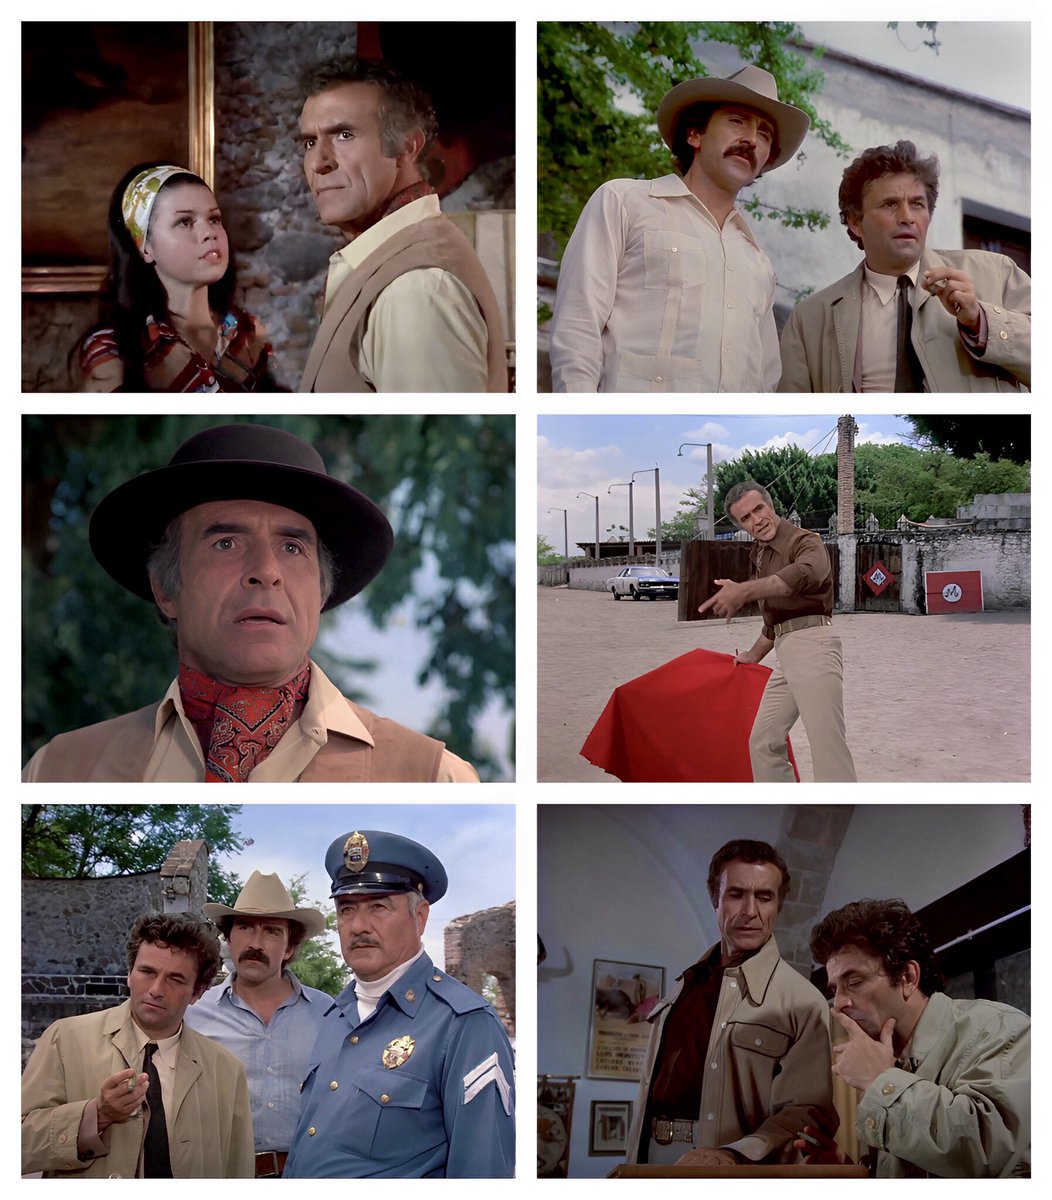 Remembering today the late 🇲🇽#Mexican born actor #RicardoMontalbán born #OnThisDay in 1920, seen here as the villainous bullfighter Luis Montoya in the #Columbo episode 'A MATTER OF HONOR' (1976) with co-stars Peter Falk,Pedro Armendáriz Jr. and Maria Grimm